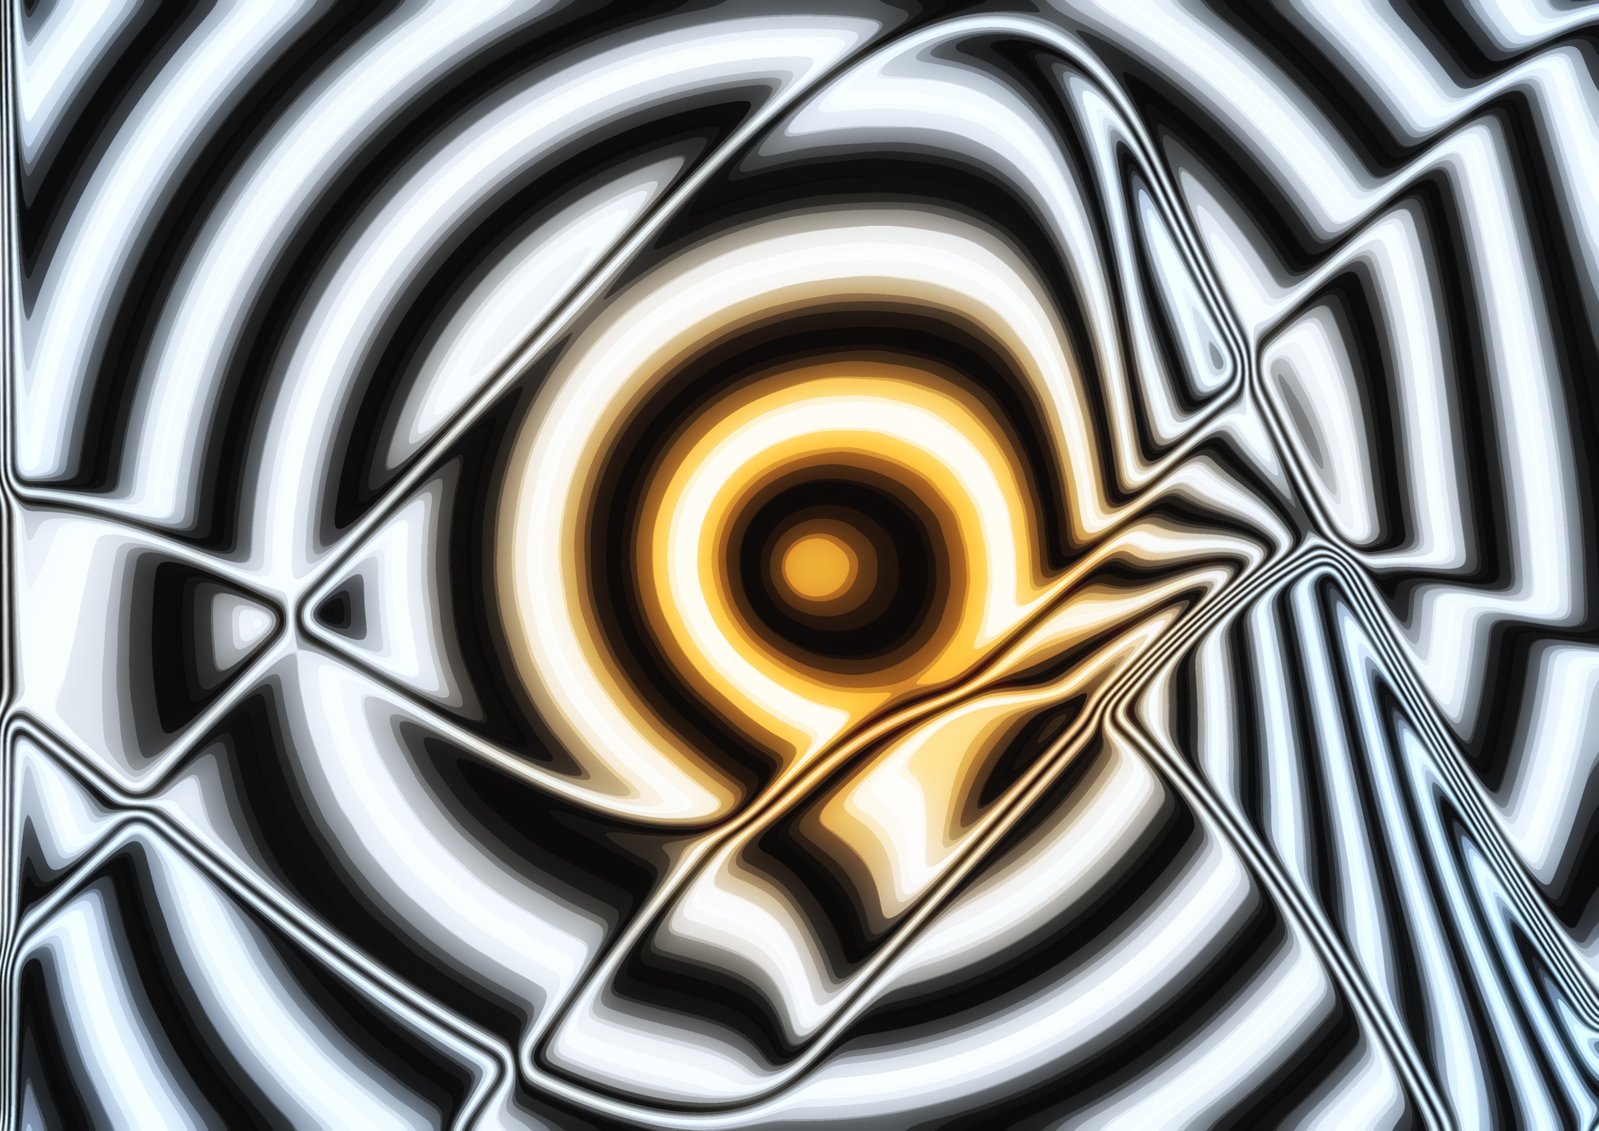 a computer image with a yellow circle surrounded by blue and black spirals